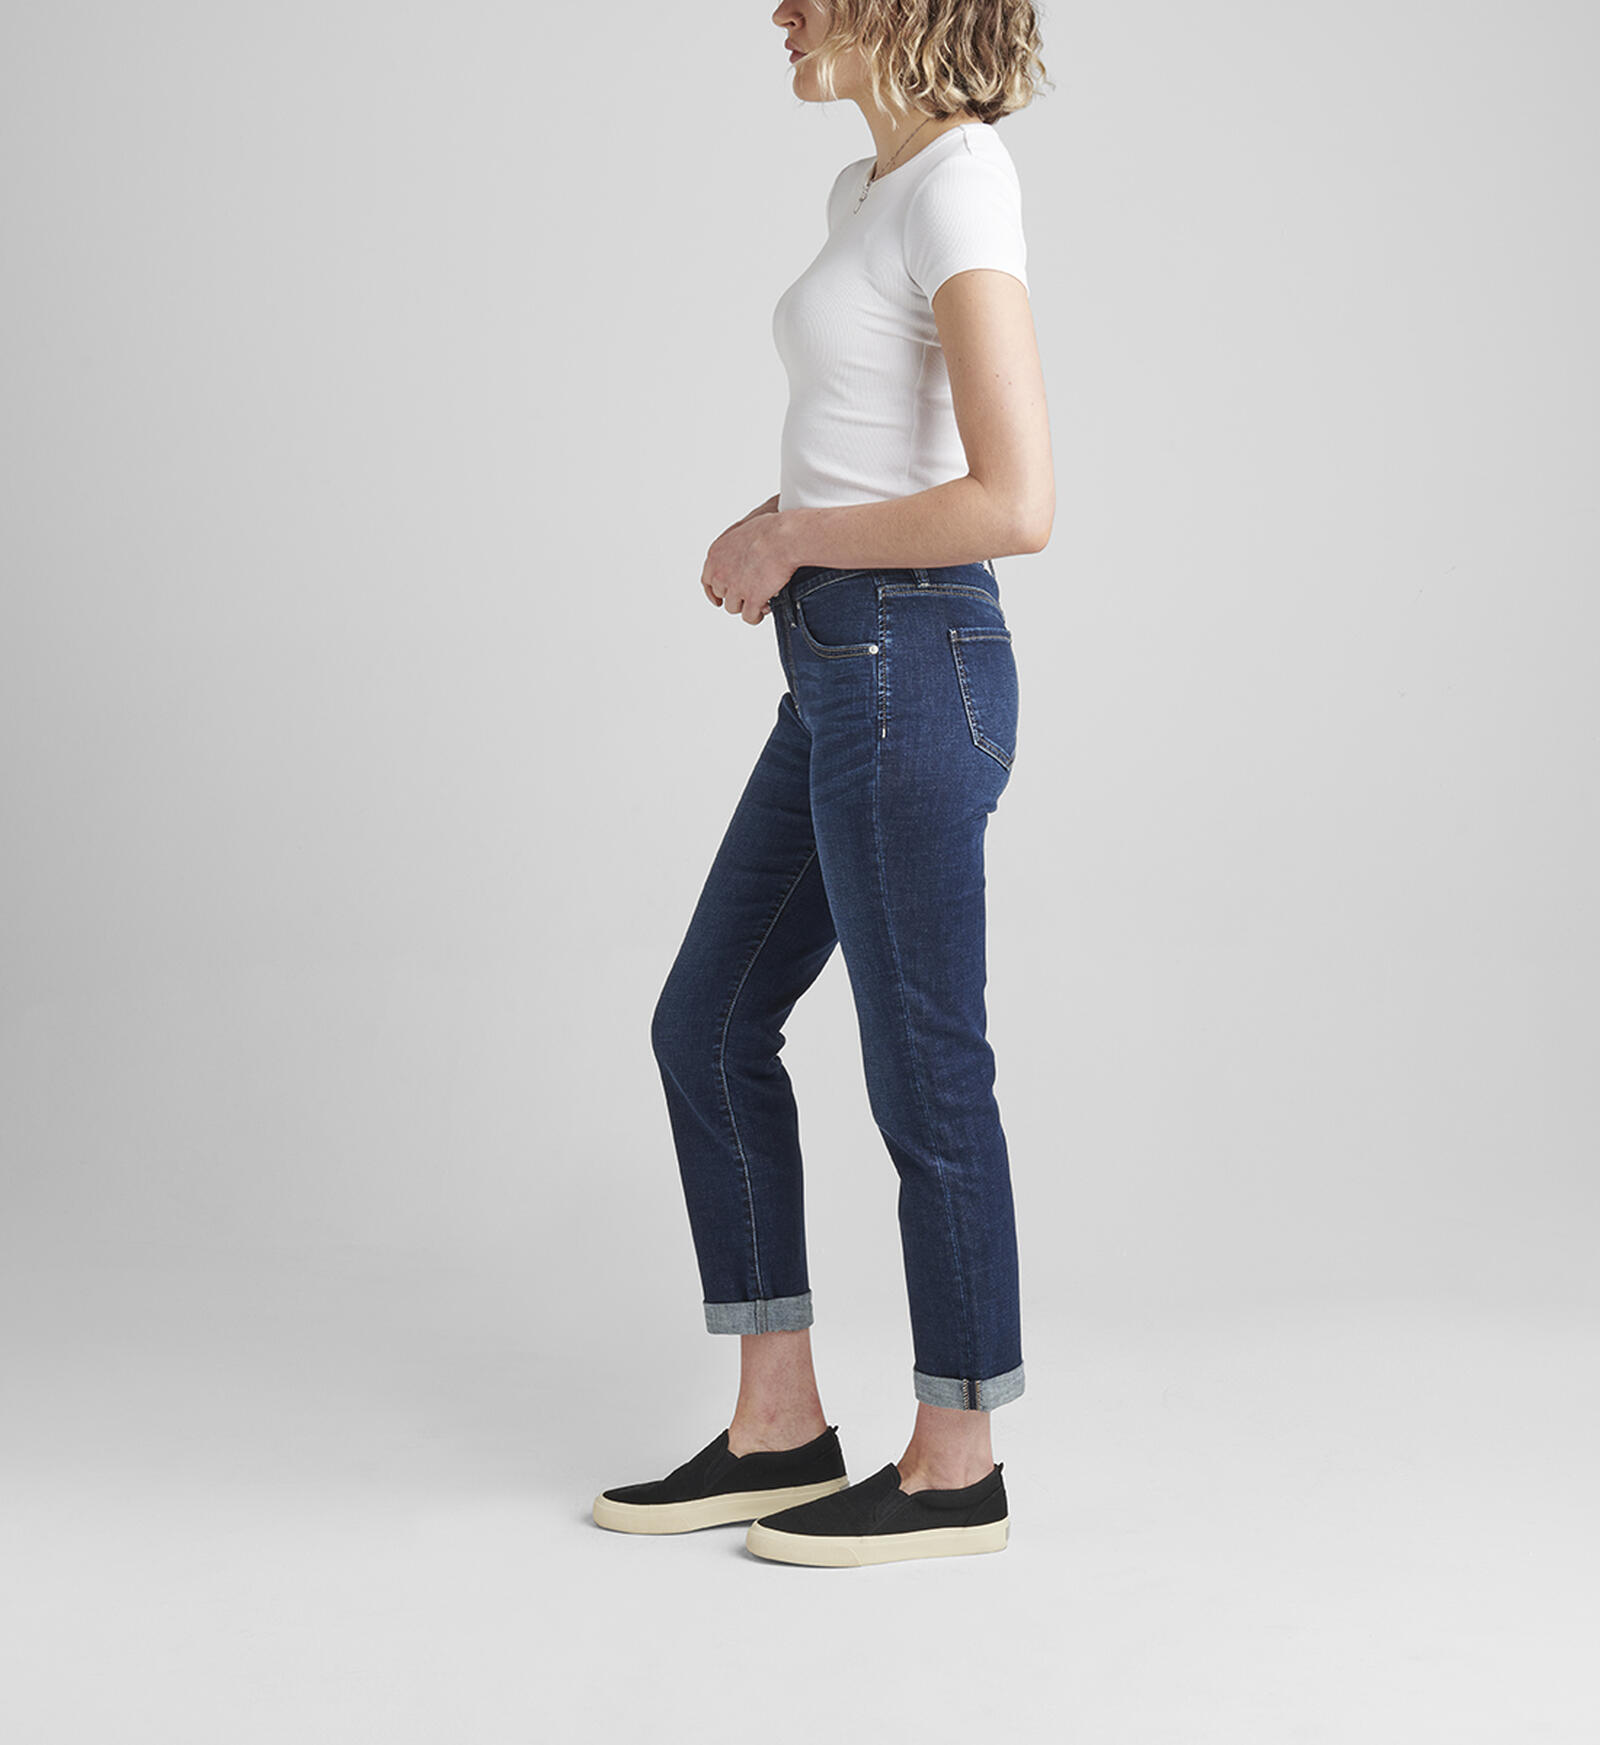 Buy Carter Mid Rise Girlfriend Jeans for USD 78.00